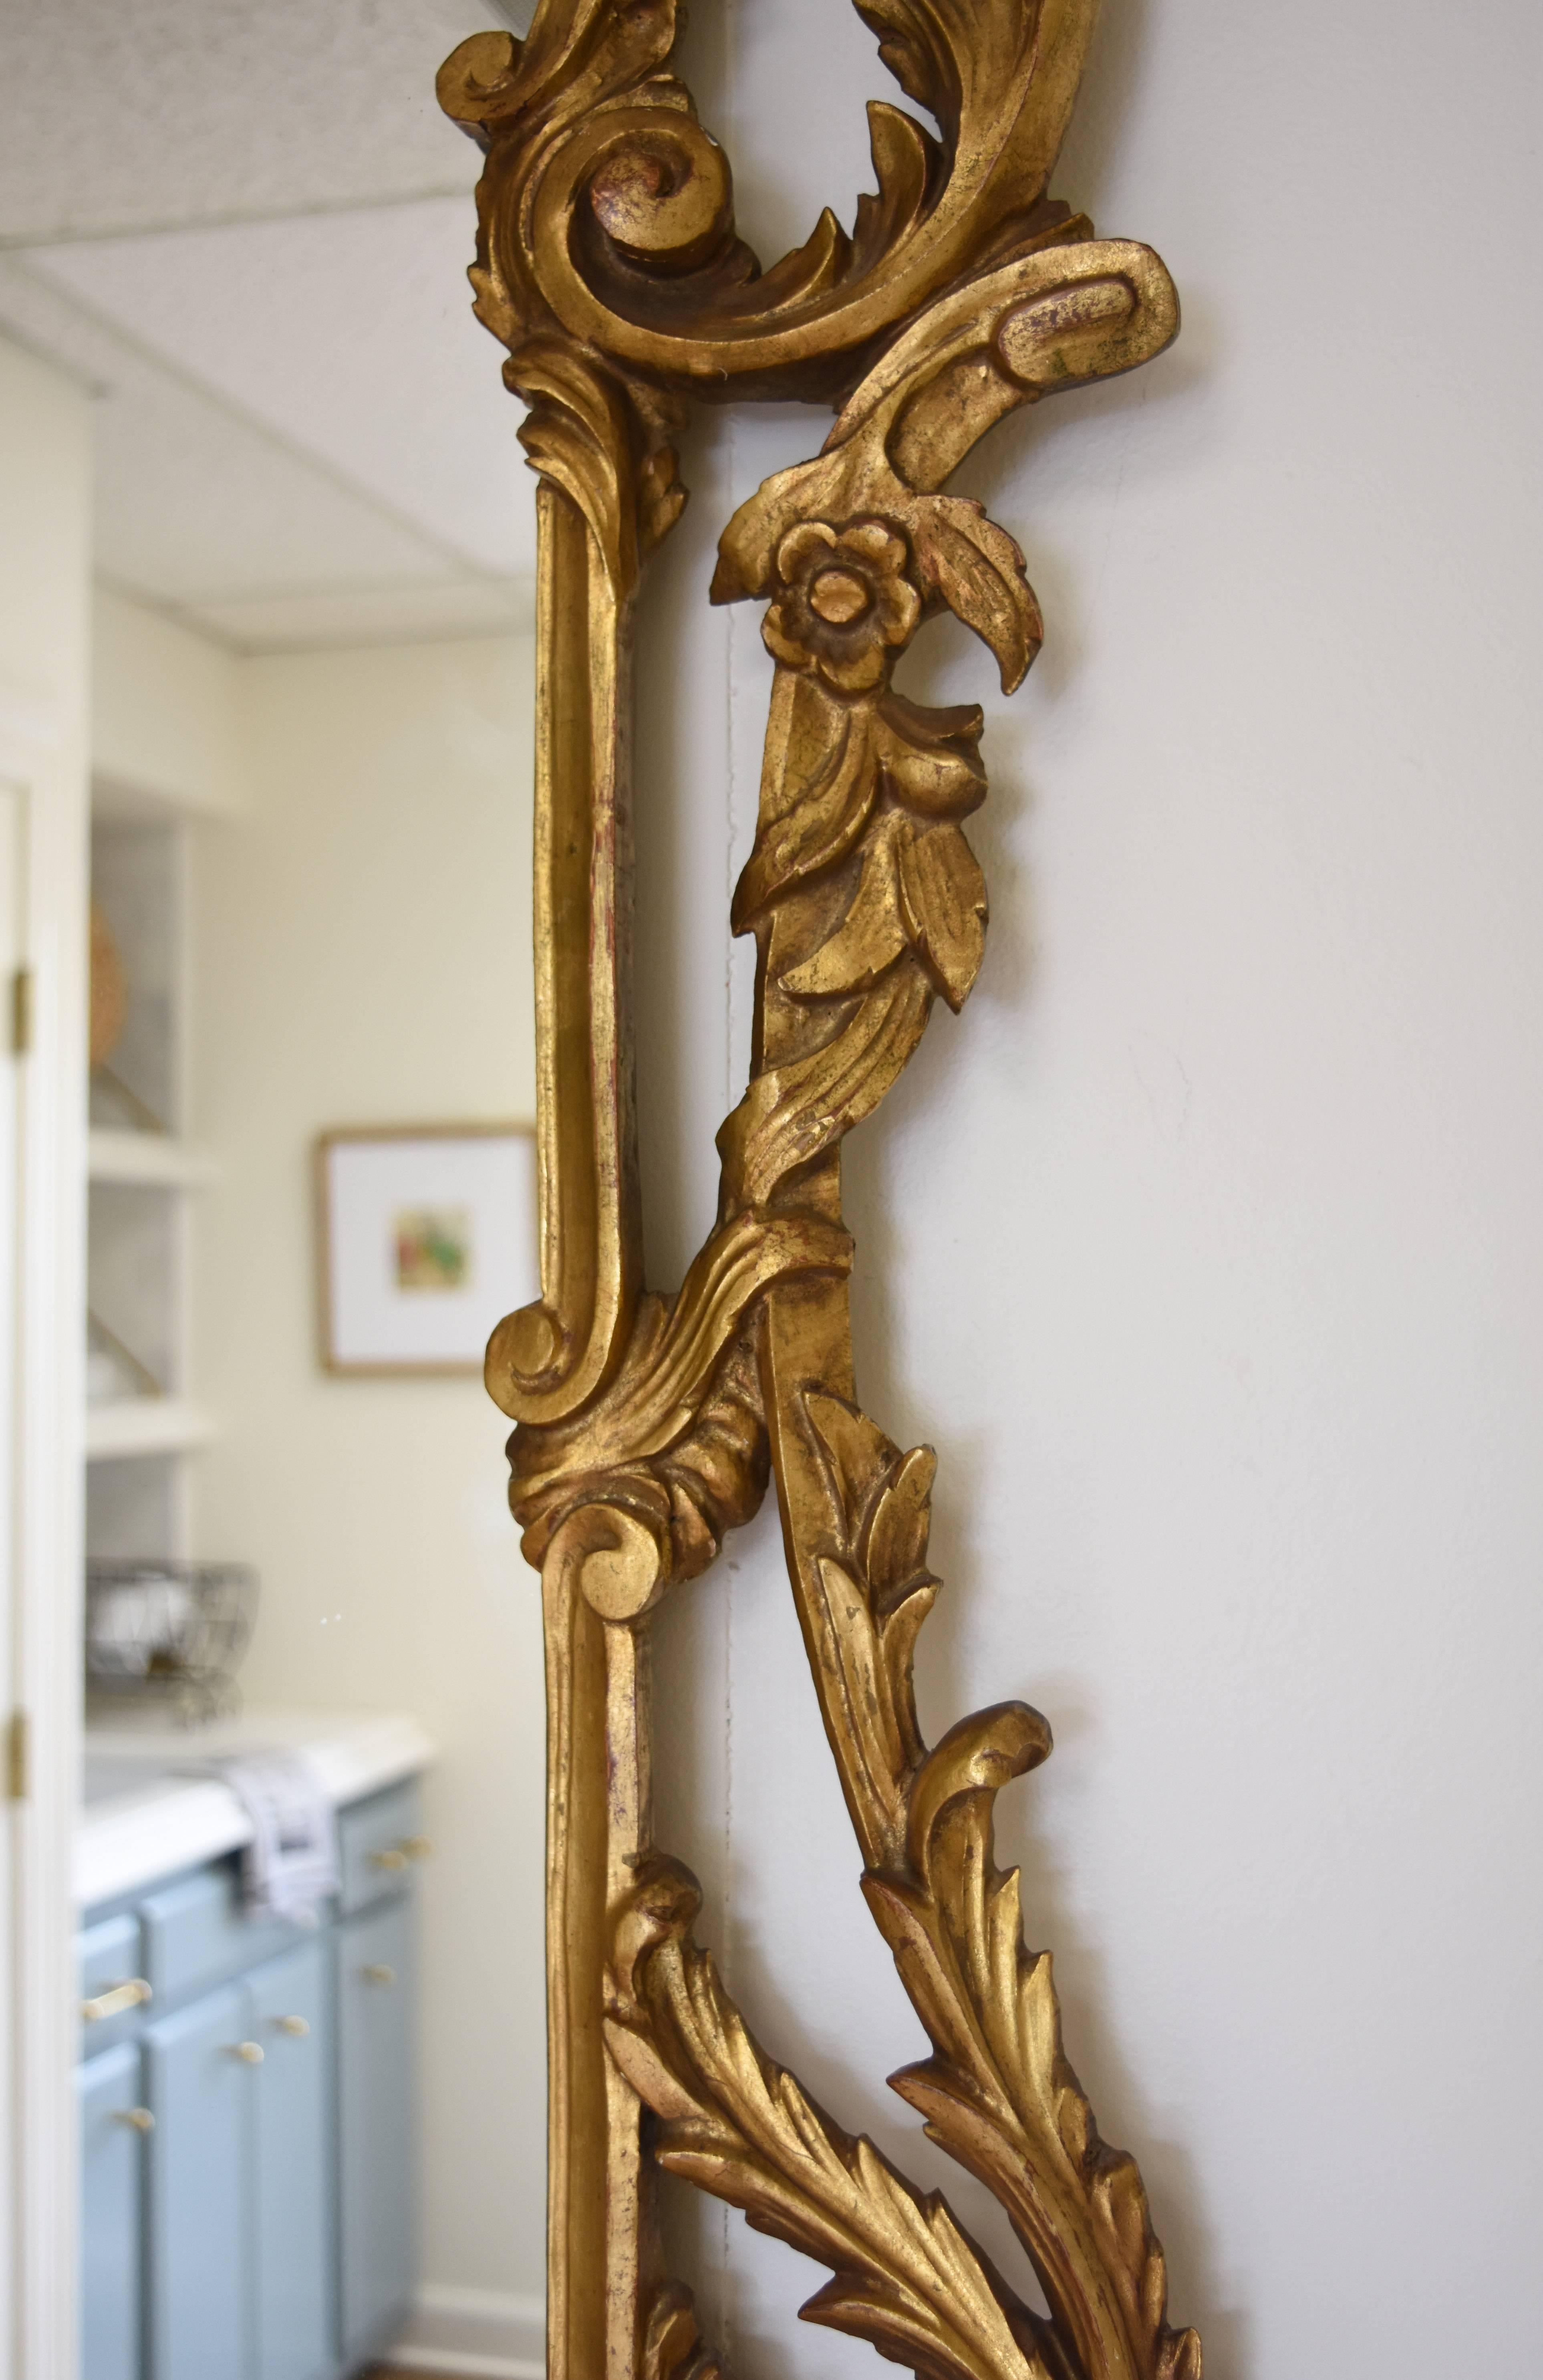 This vintage Italian giltwood mirror features carved scrolls and flowers. It is in the Rococo style and has a lovely gold finish.